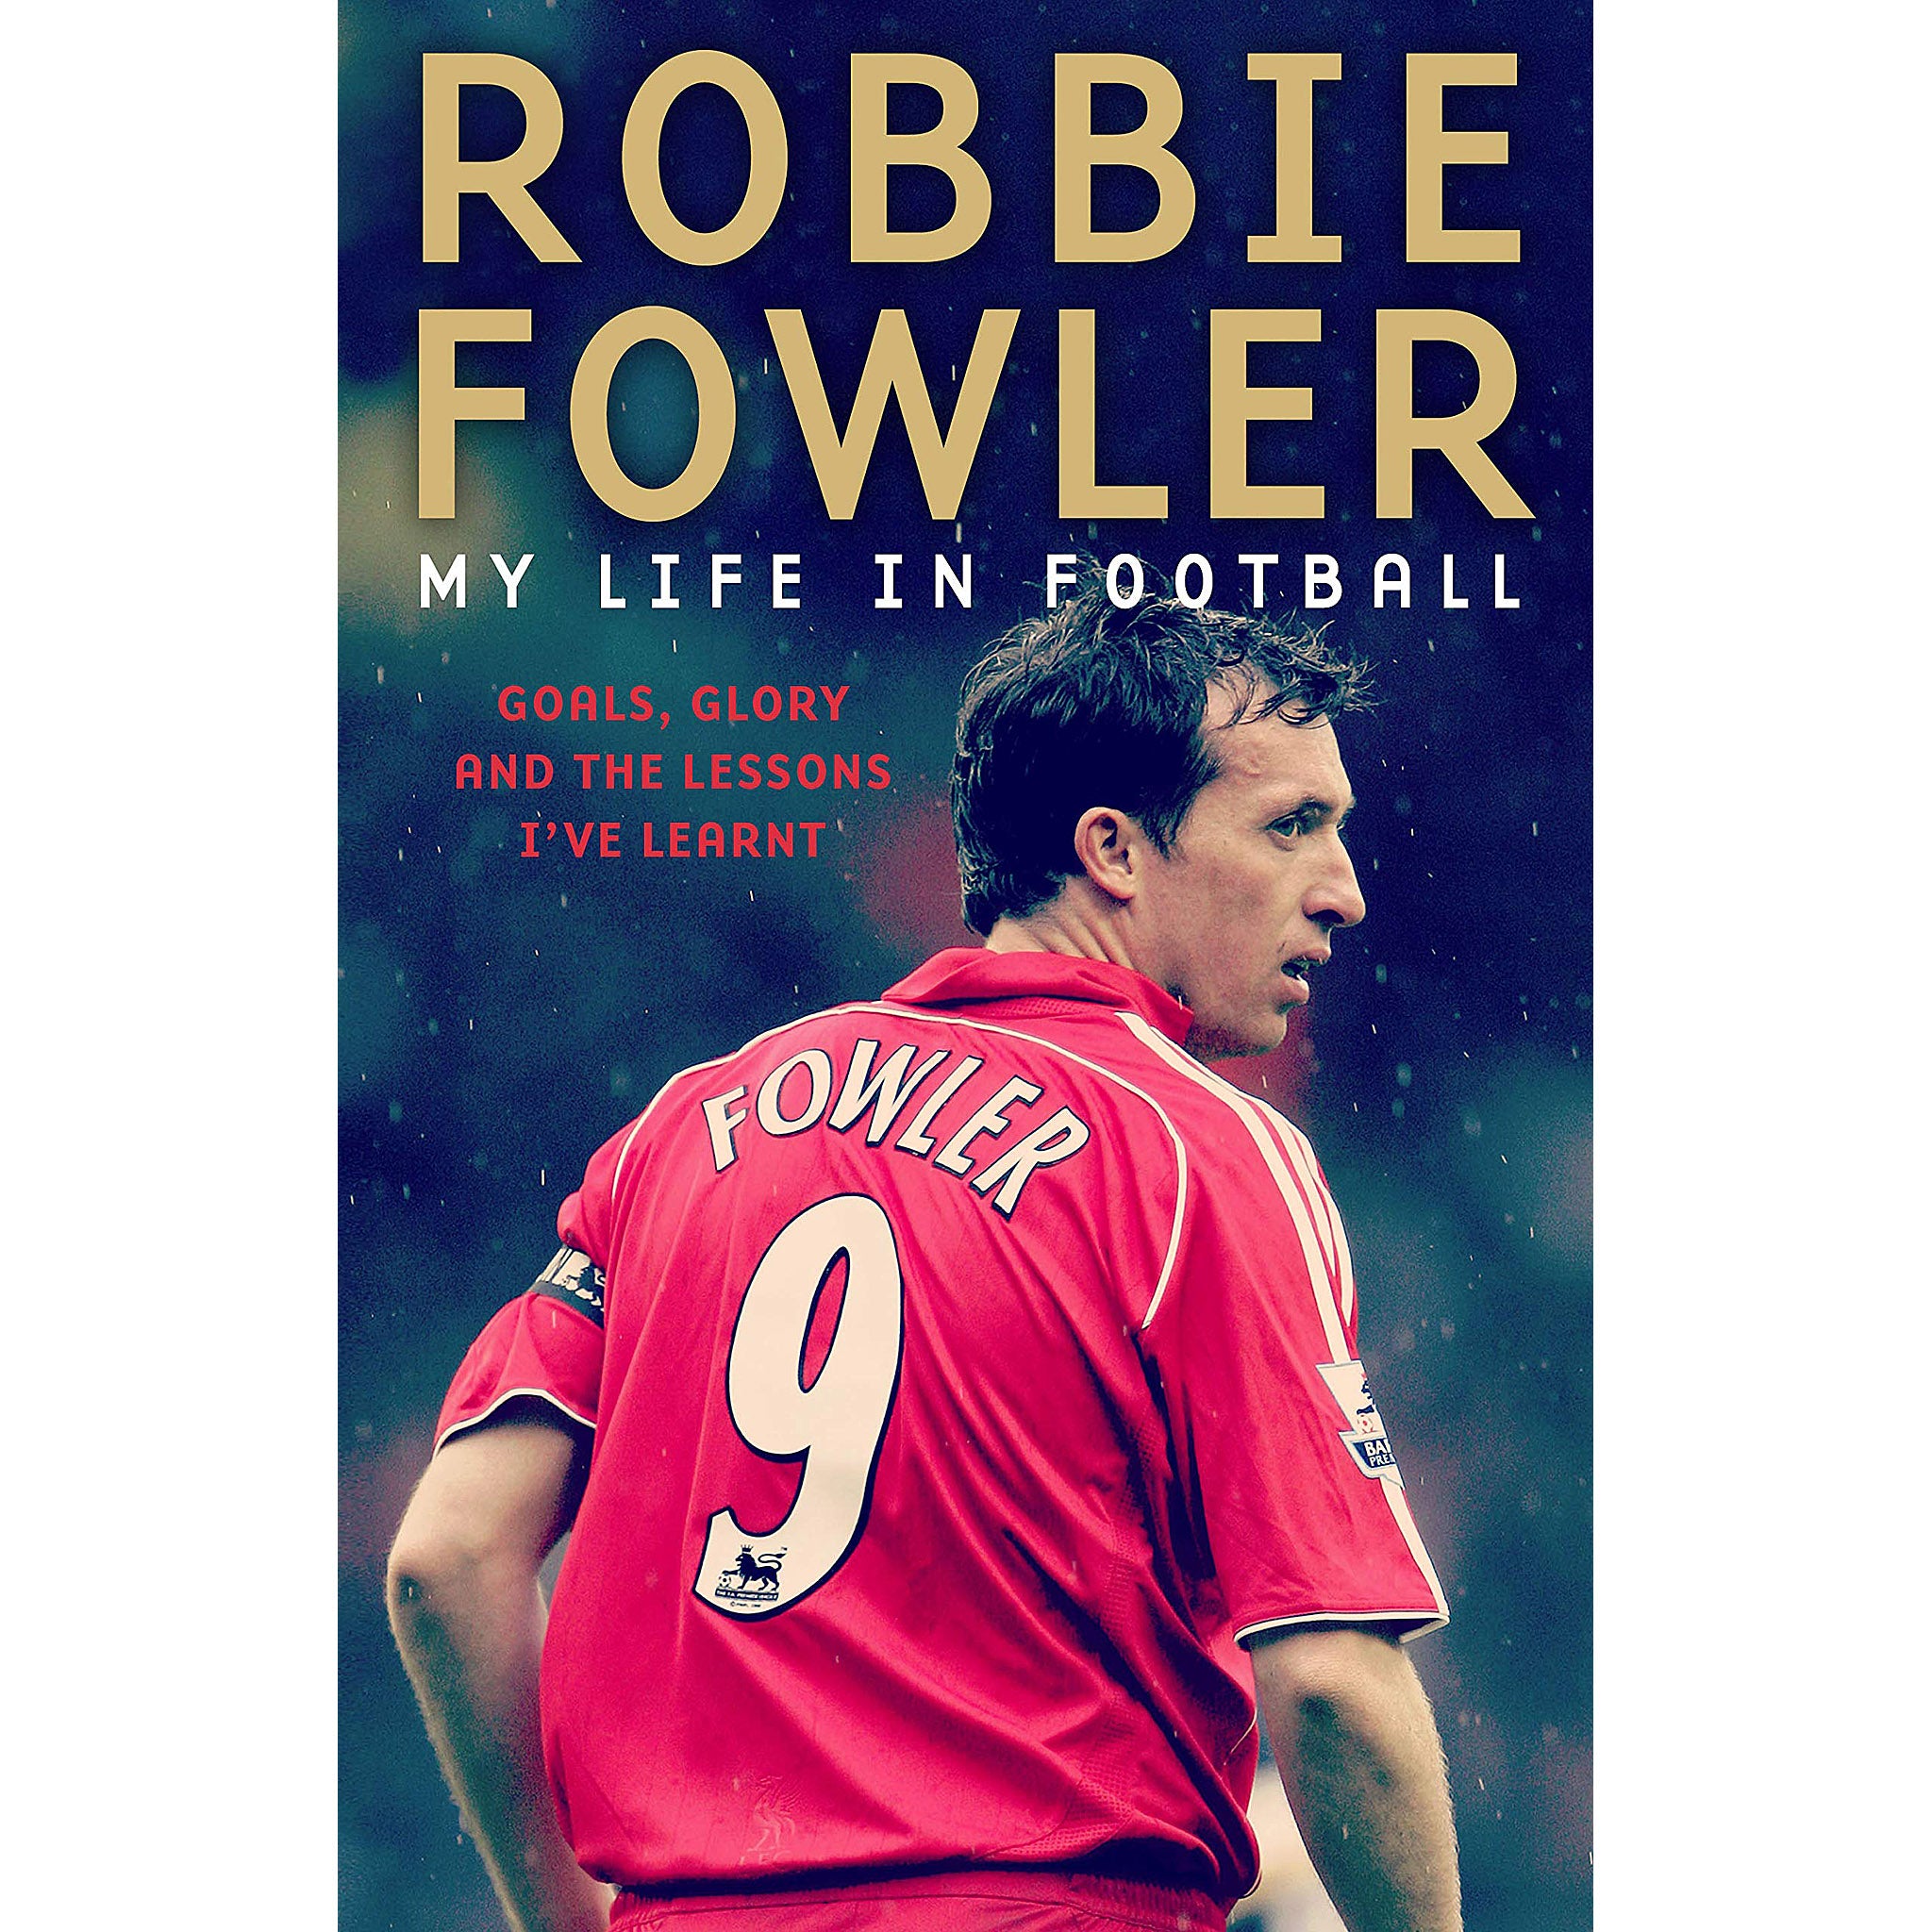 Robbie Fowler – My Life in Football